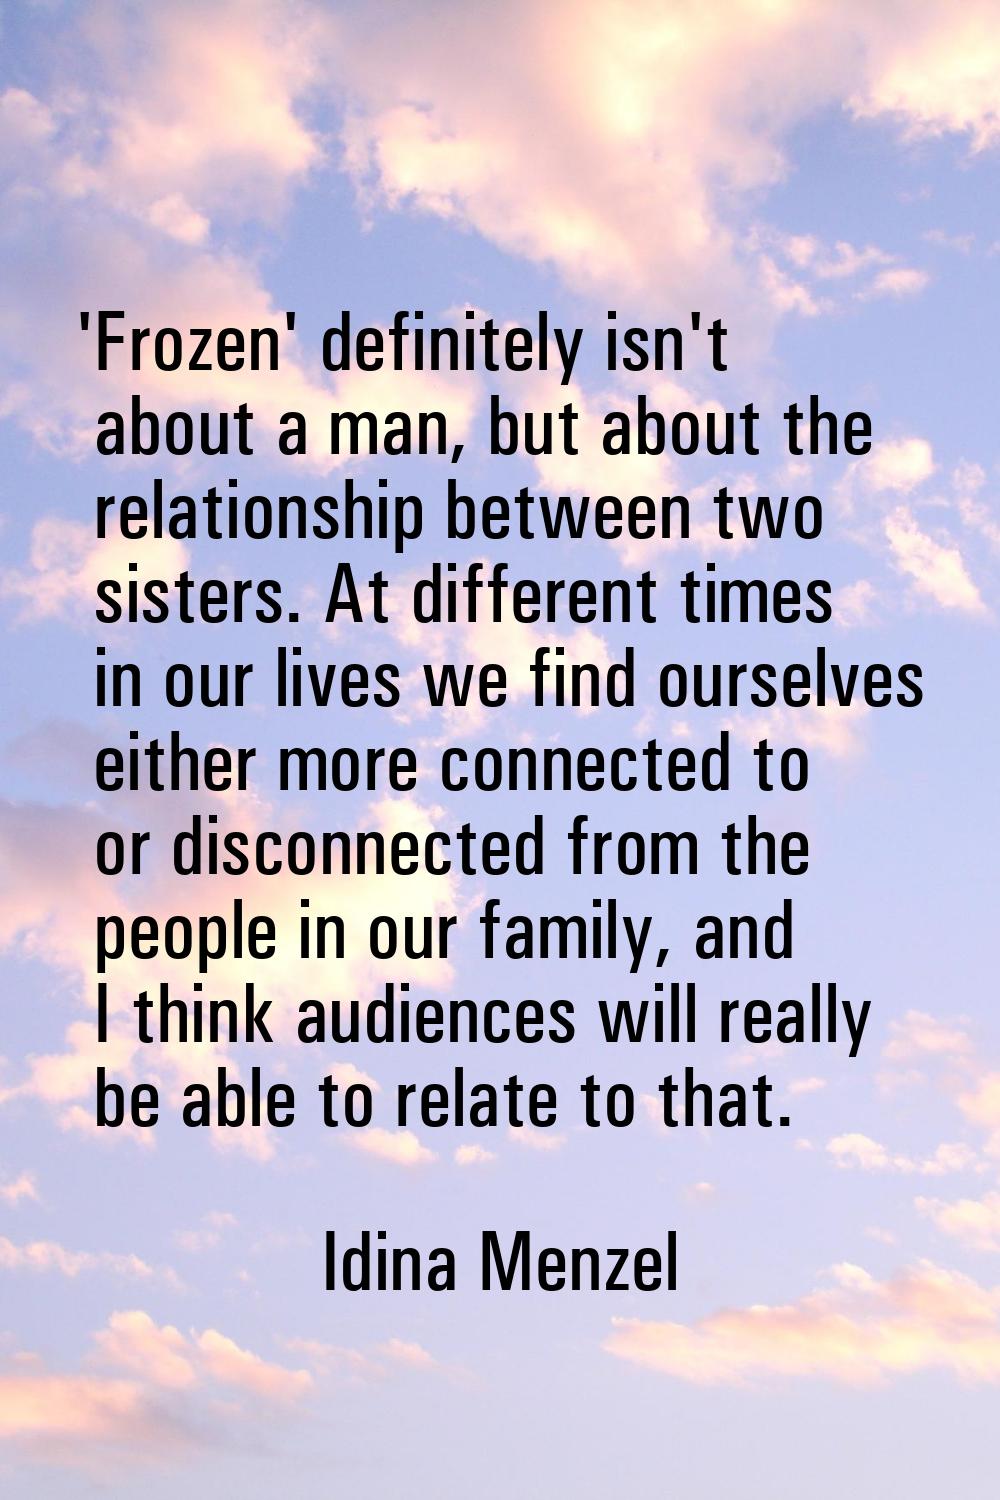 'Frozen' definitely isn't about a man, but about the relationship between two sisters. At different